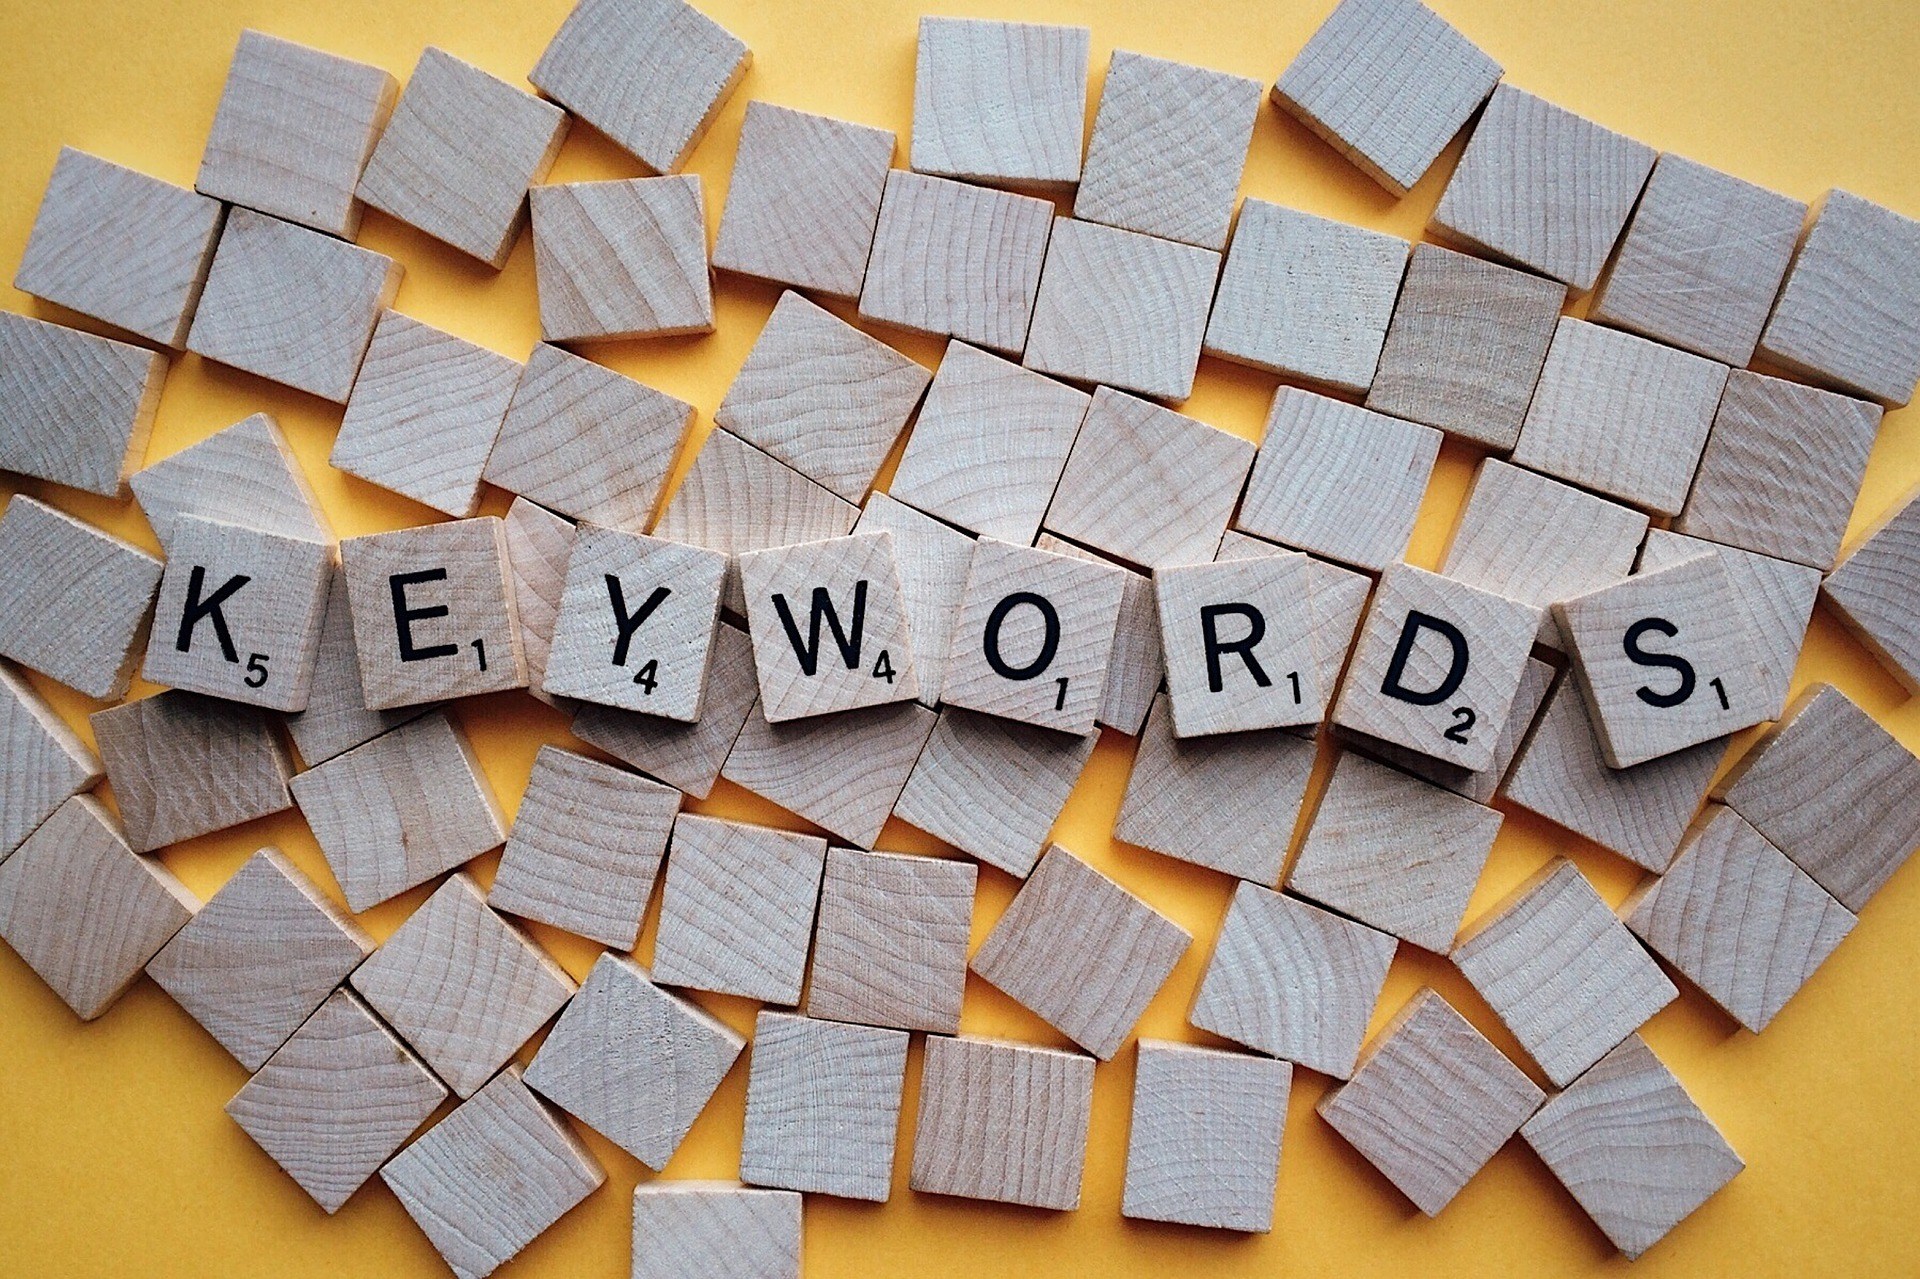 keywords and scrabble